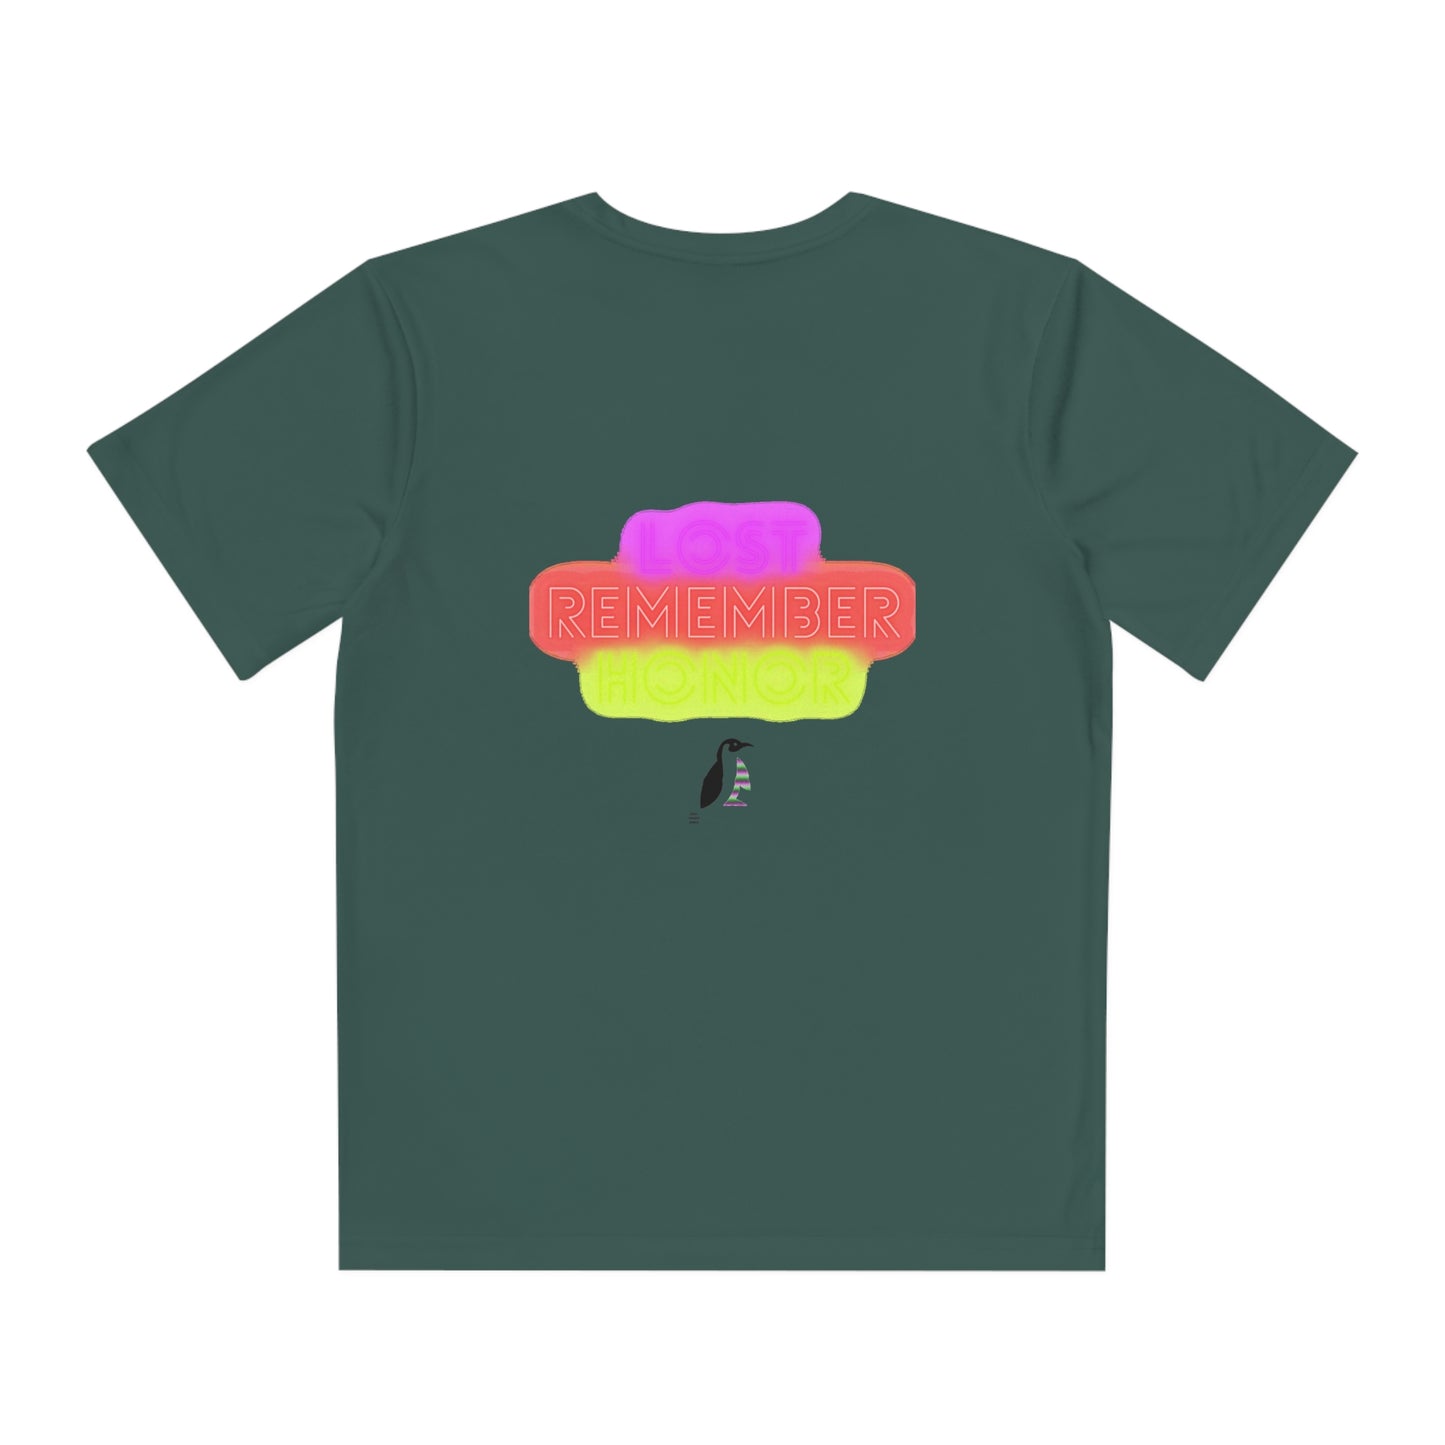 Youth Competitor Tee #1: Fishing